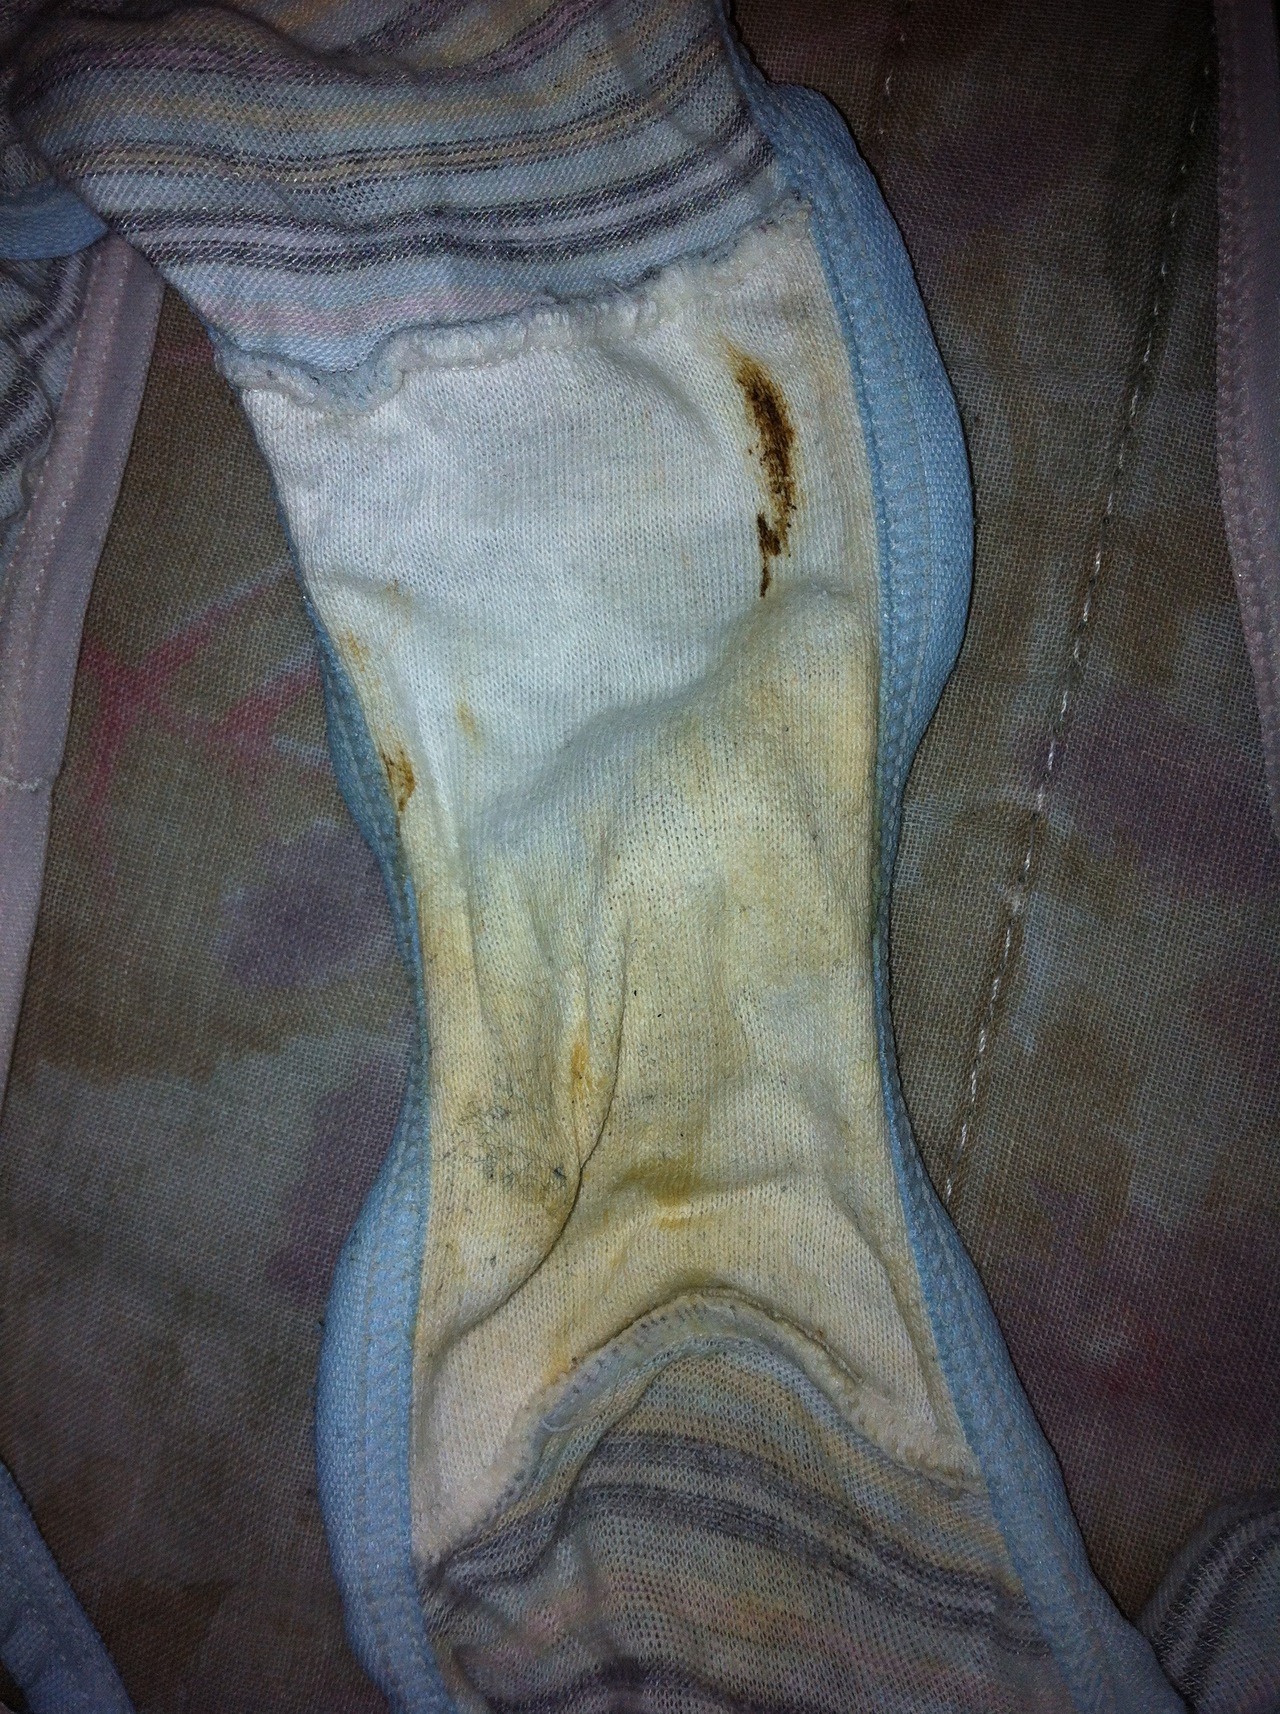 Denise (deniseroch@hotmail.com.br) submitted: My dirty pants ♥ dirtypants:  Many